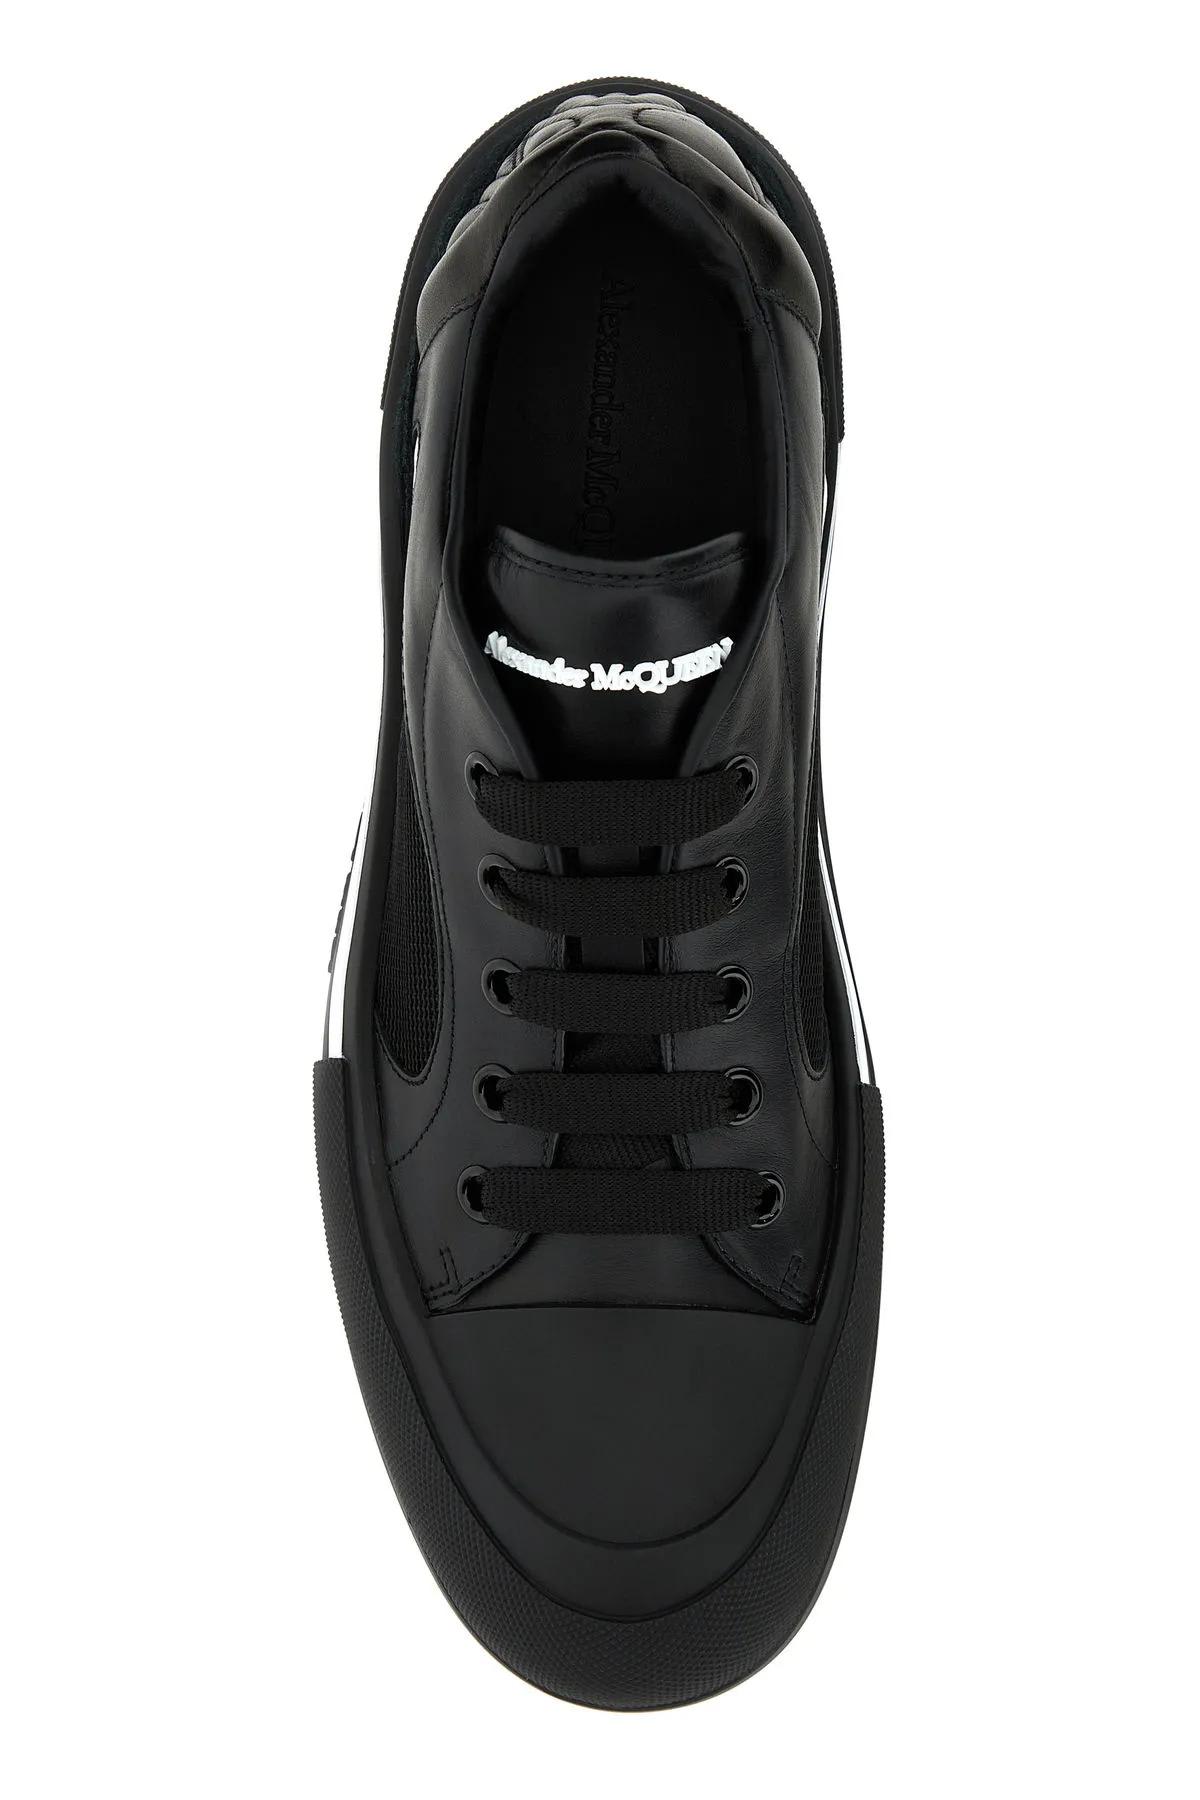 Shop Alexander Mcqueen Black Nylon And Leather Plimsoll Sneakers In Nero